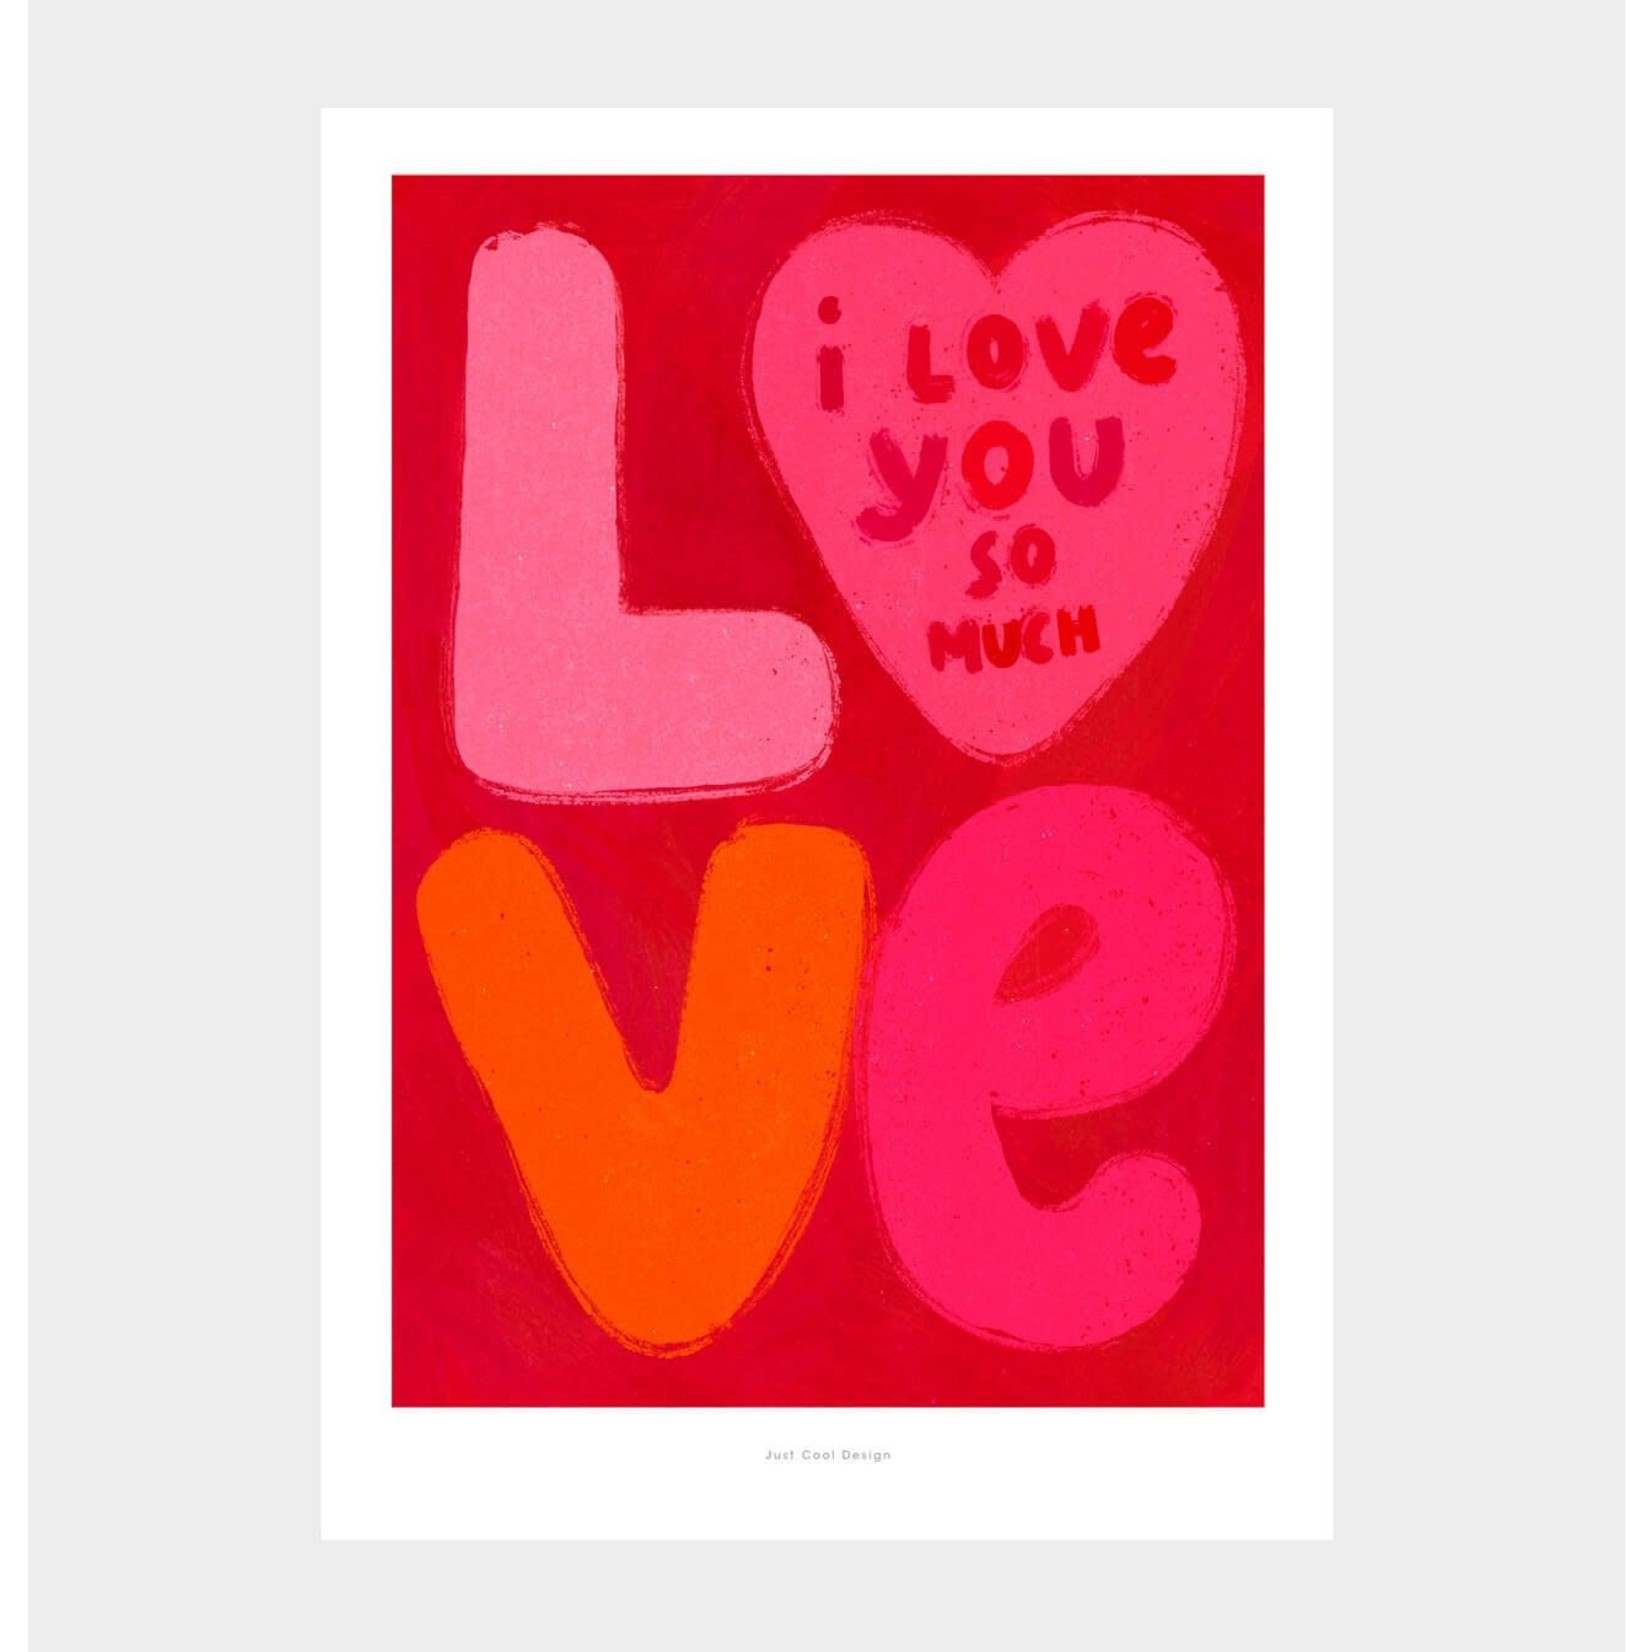 Just Cool Design A5 I love you so much | Illustration Poster Art Print